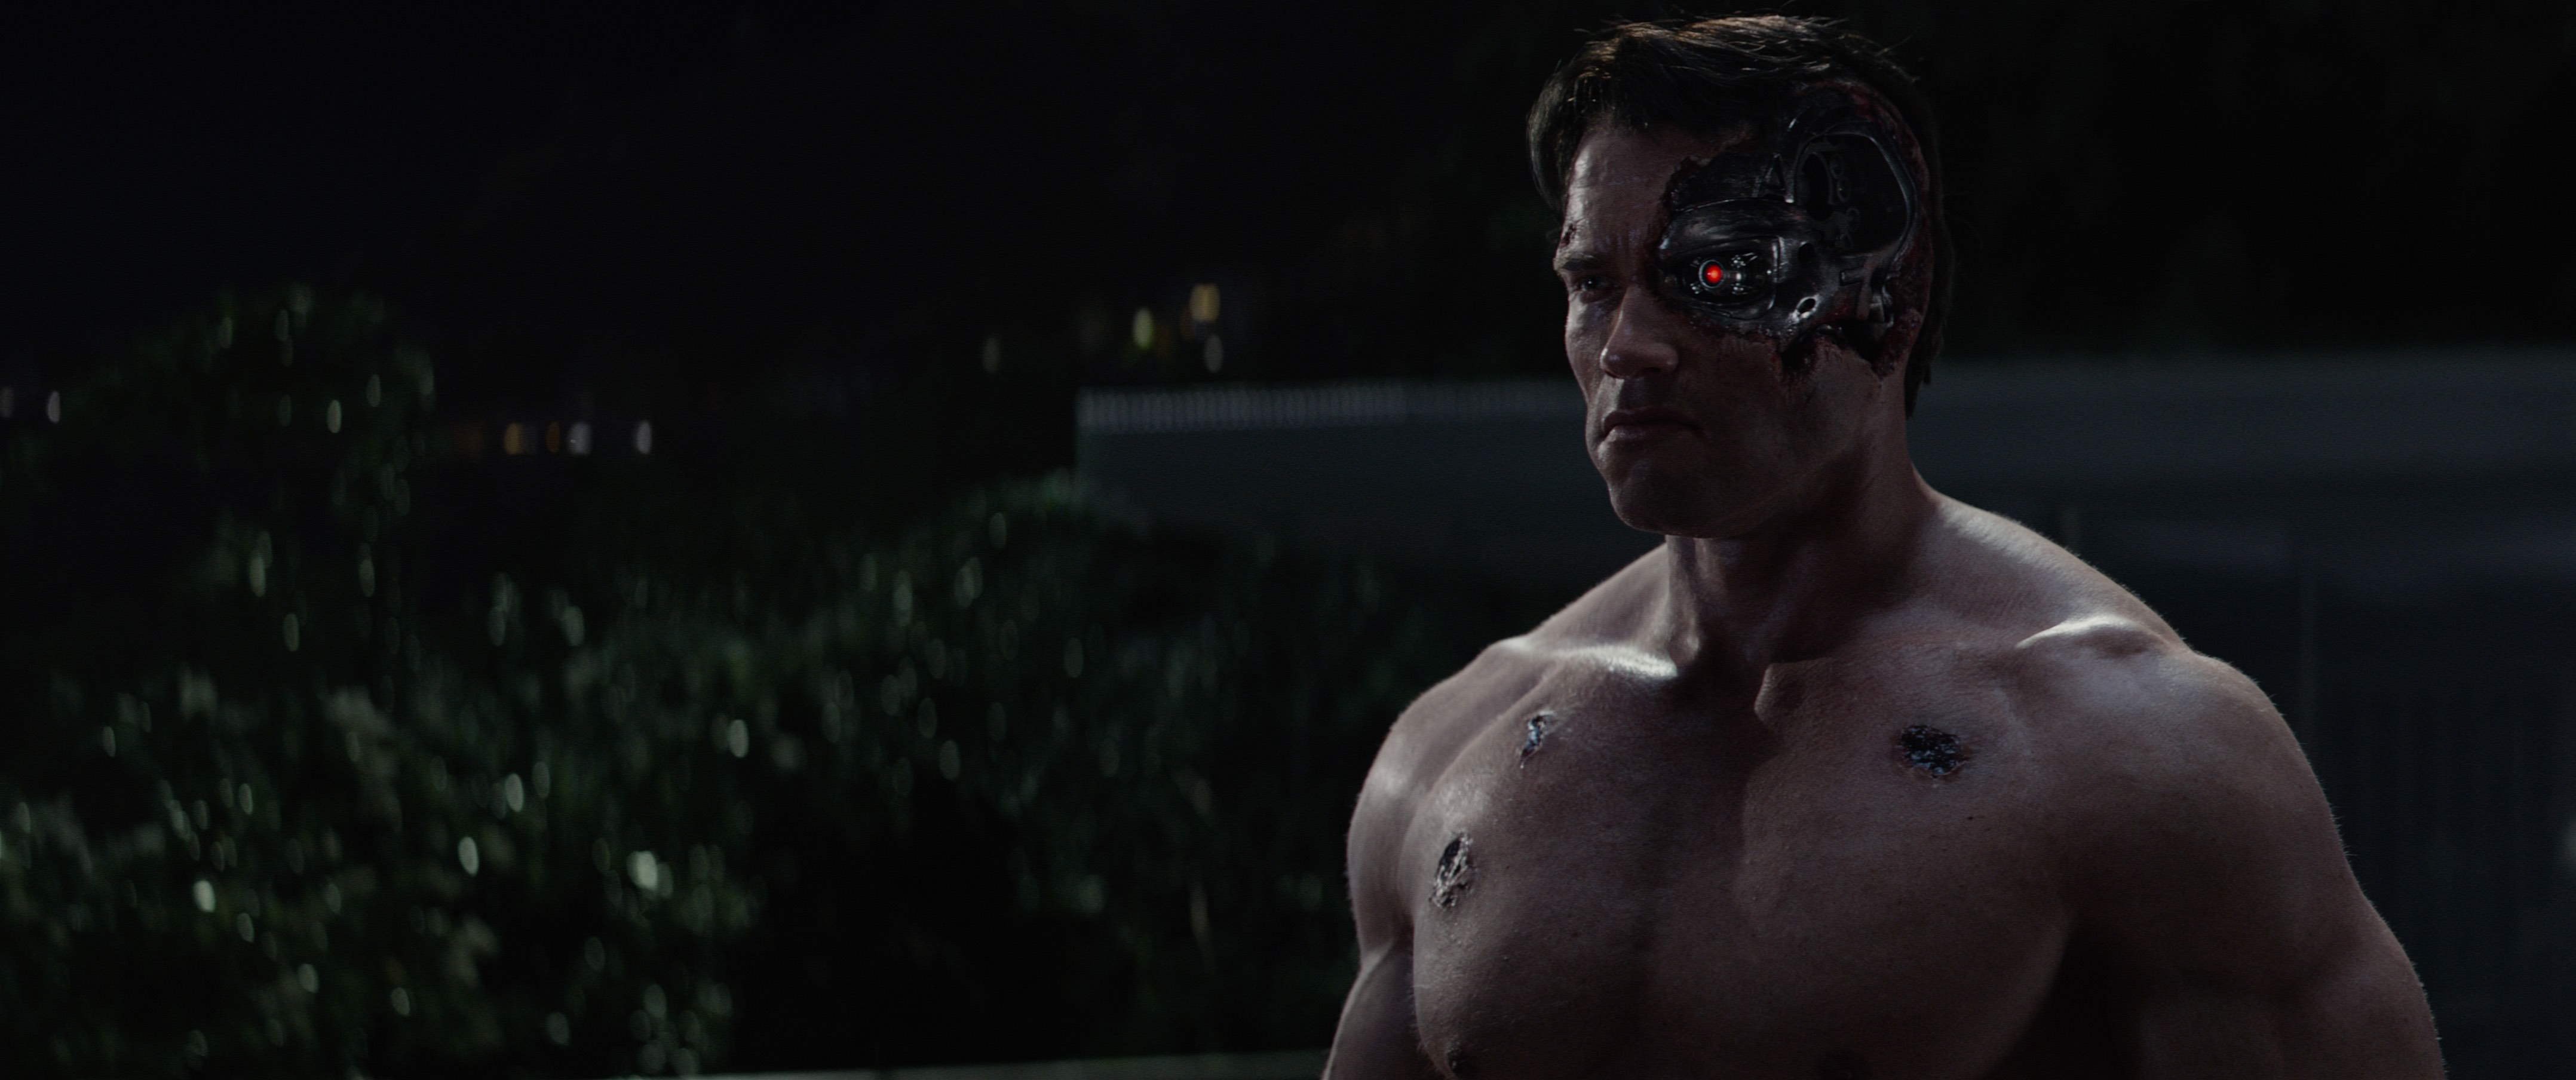 The Terminator in TERMINATOR GENISYS from Paramount Pictures and Skydance Productions.